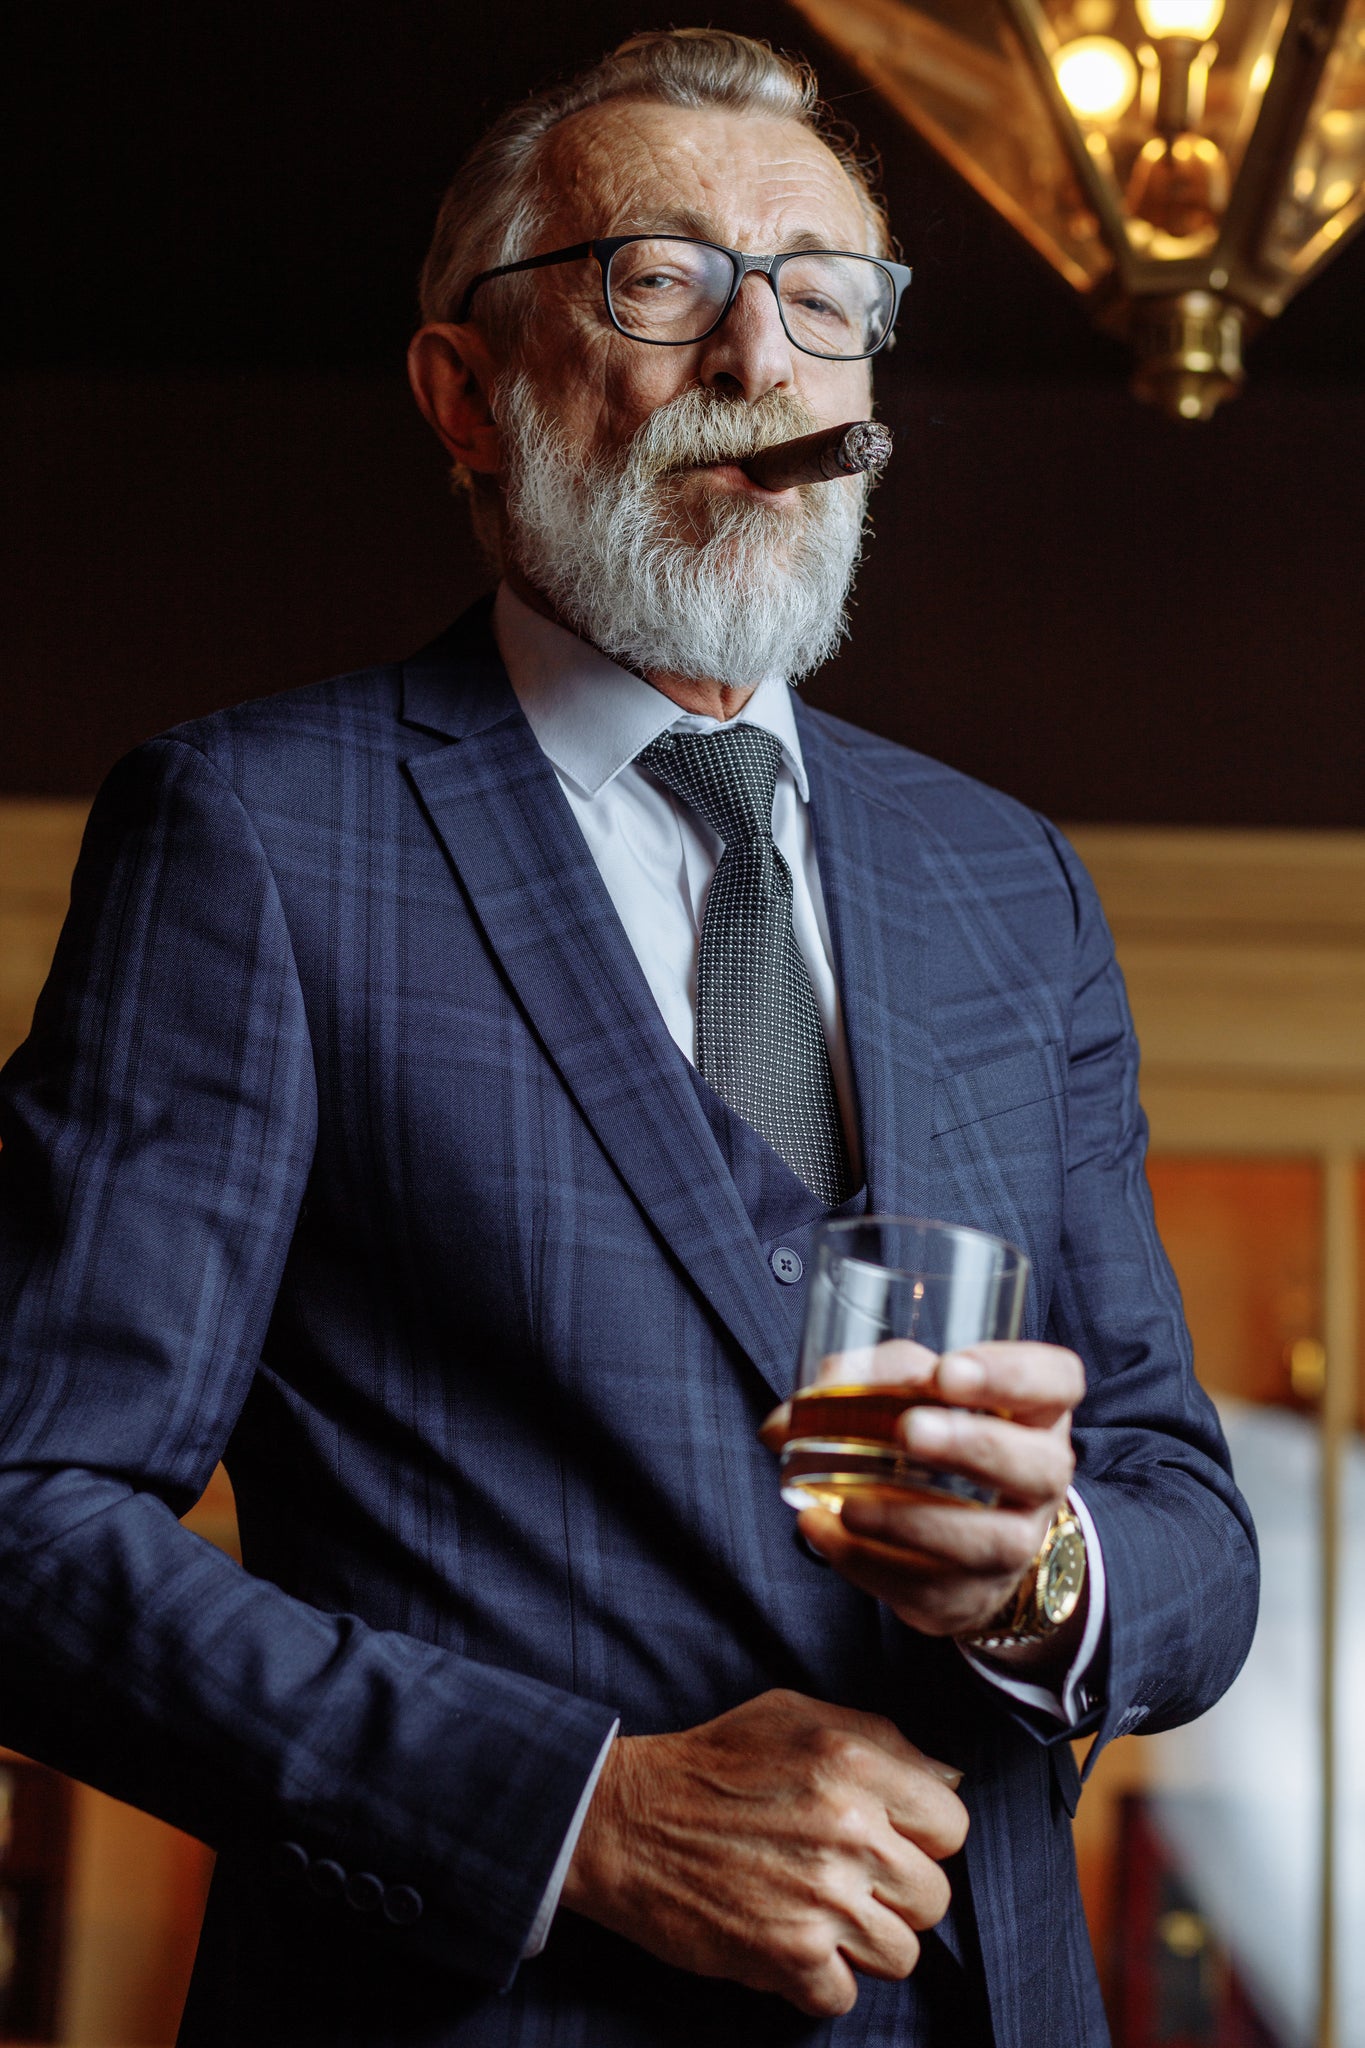 The man relaxes and drinks whiskey from a shatterproof whiskey glass, tritan glasses. Glasses for restaurants, beach resorts, yachts, golf courses and cruises